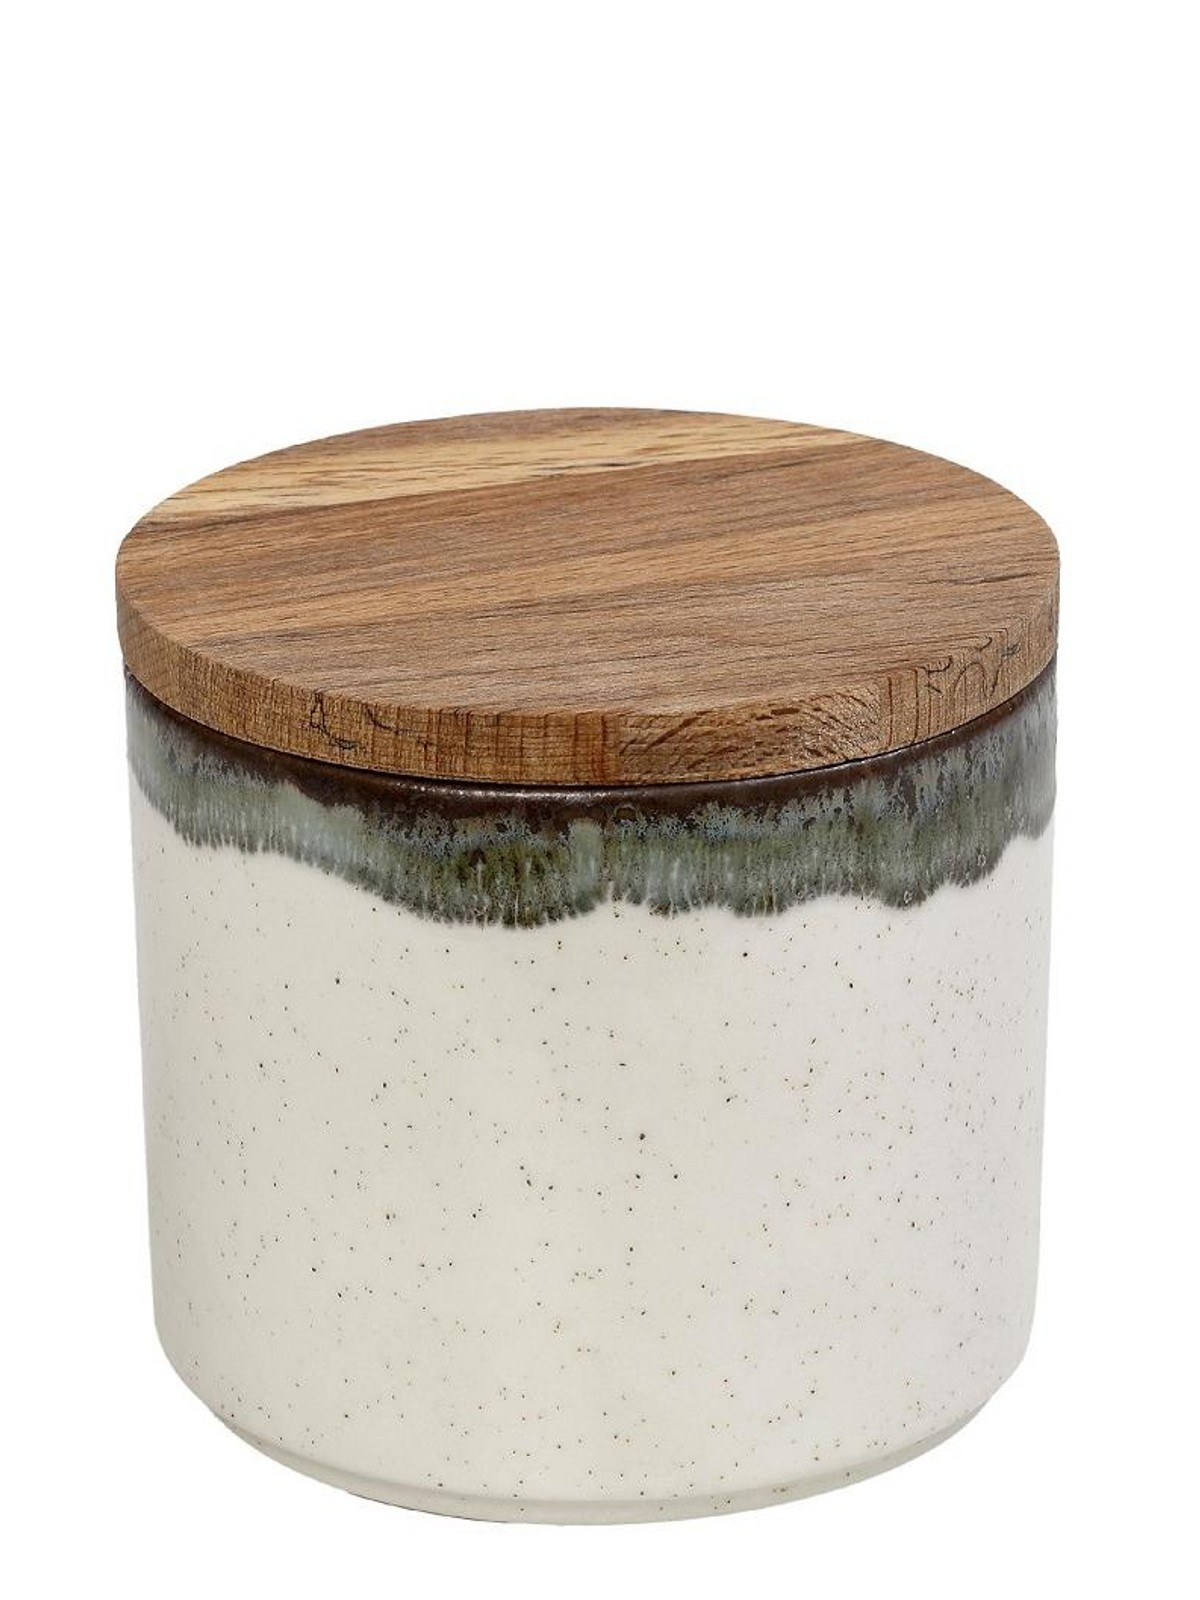 Ceramic container with wooden lid